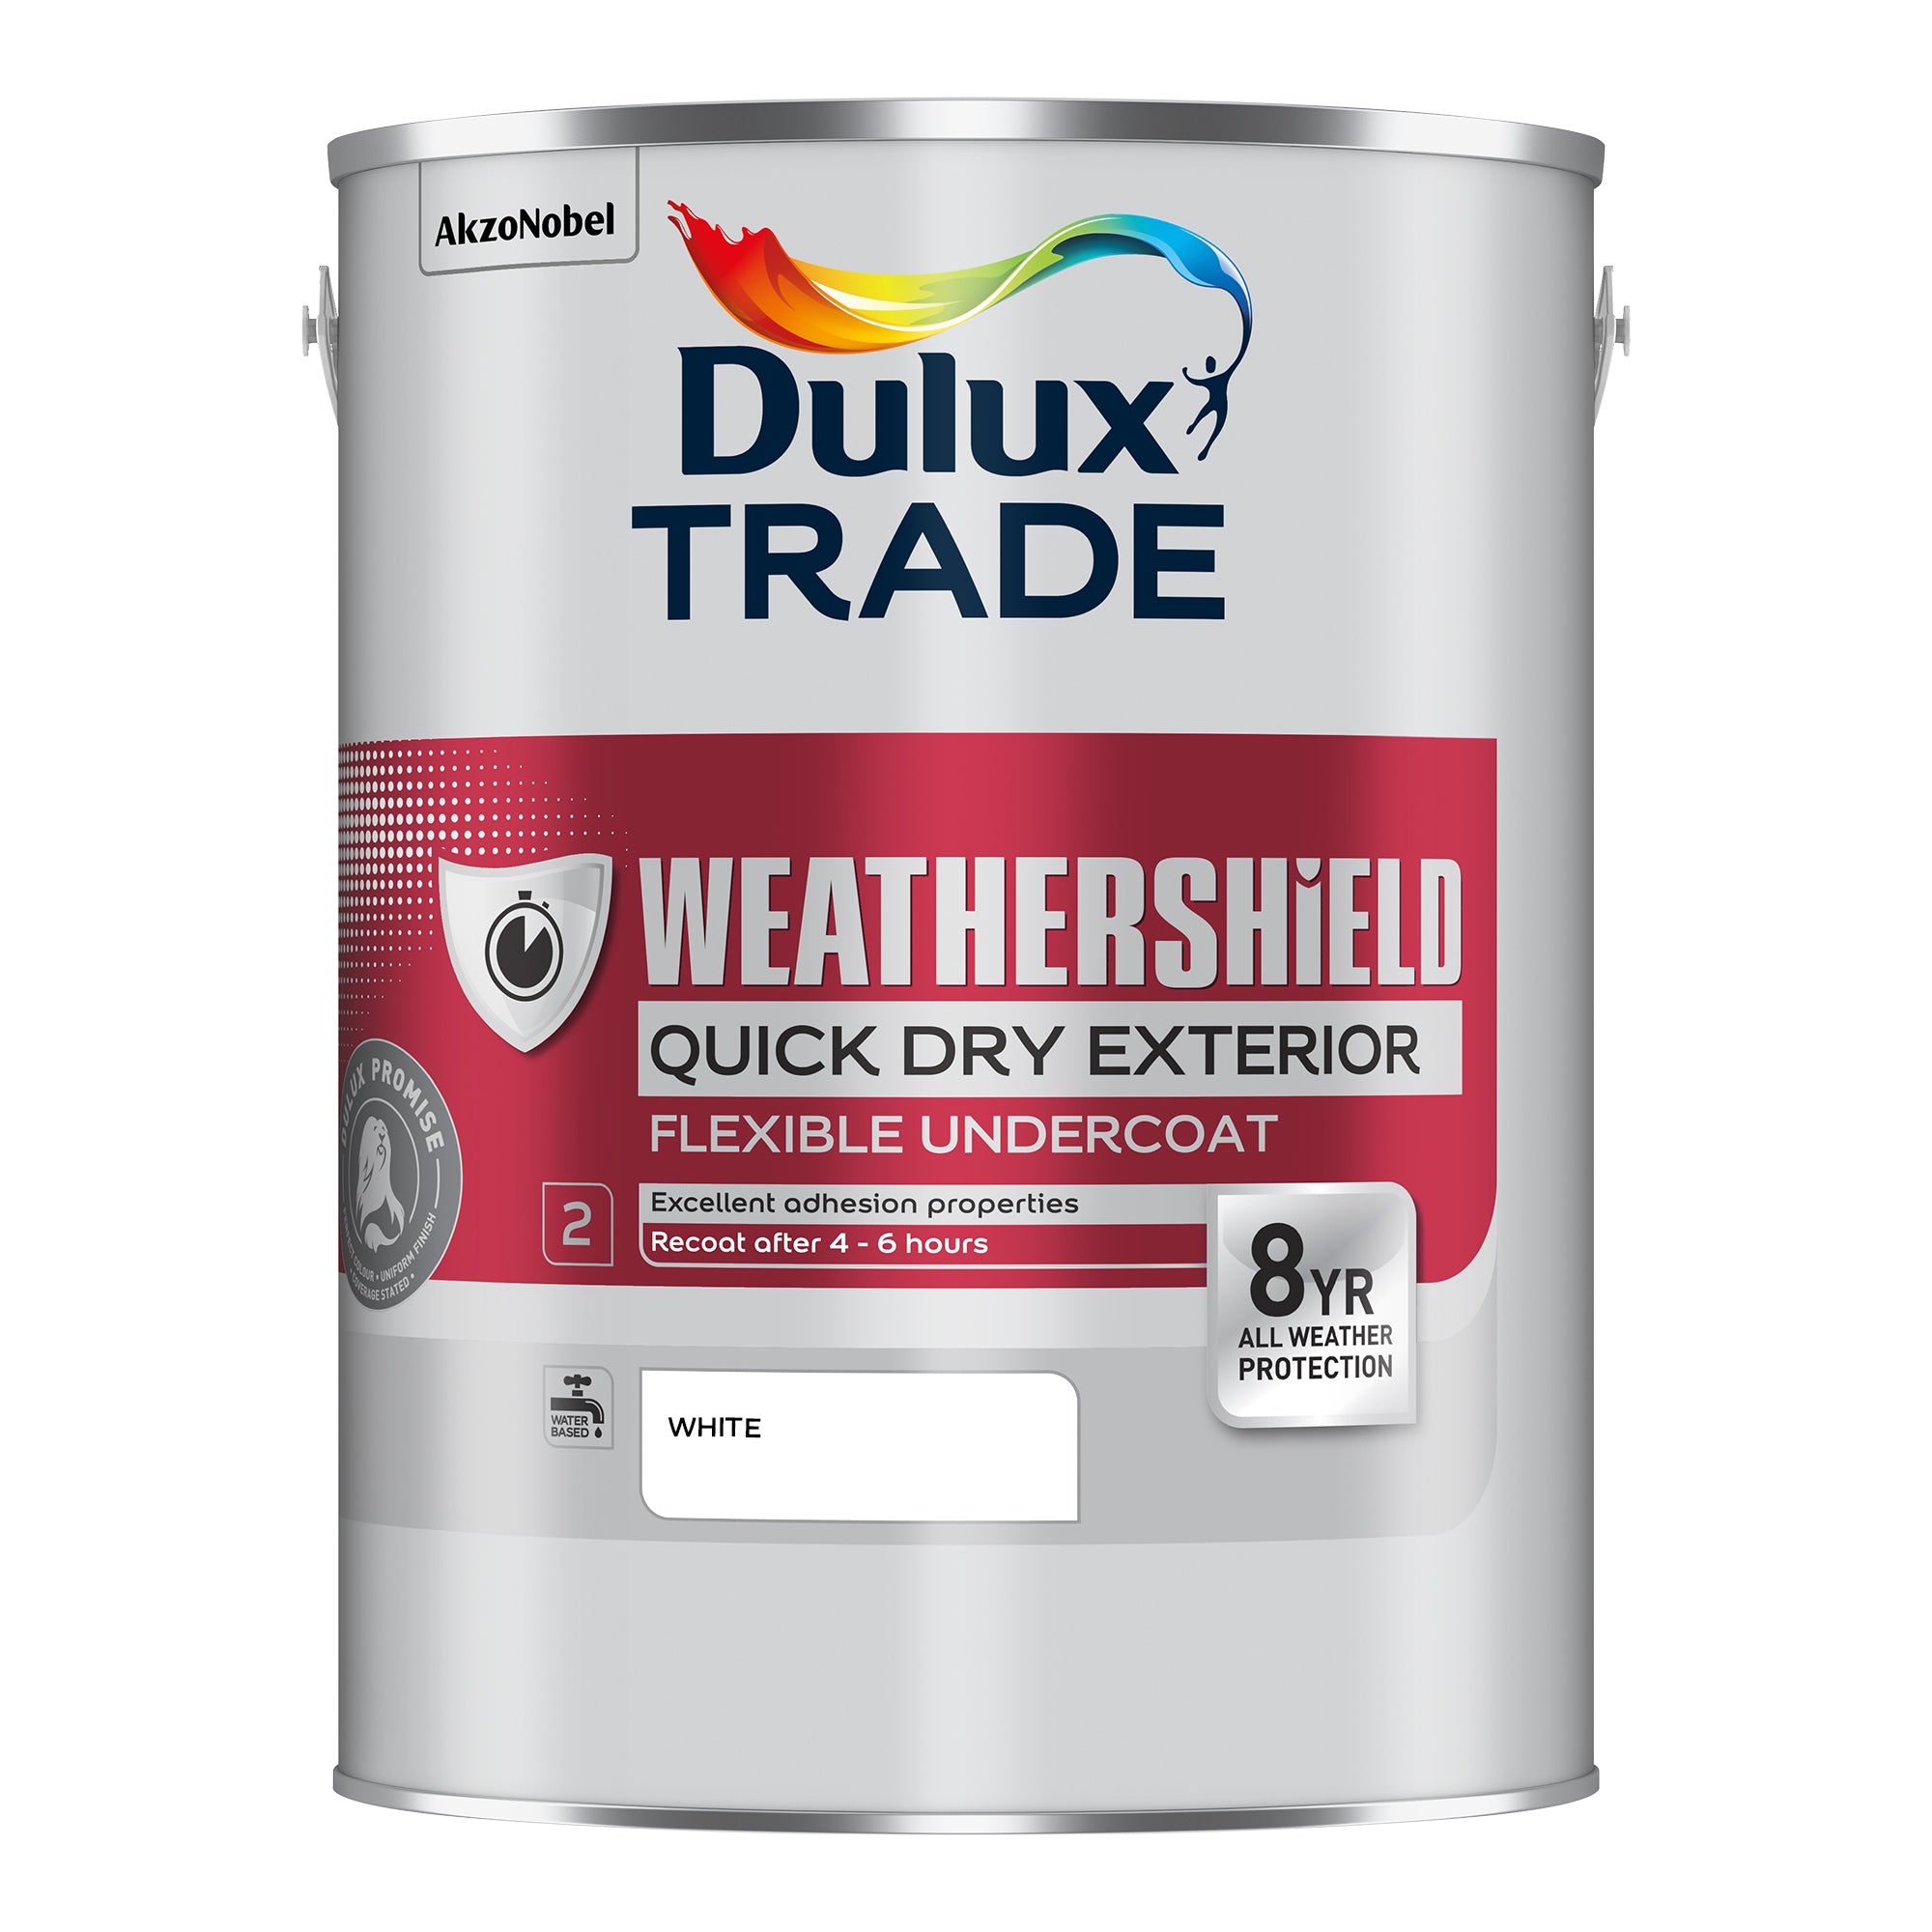 Dulux Trade Weathershield Quick Drying Exterior Flexible Undercoat White 5L